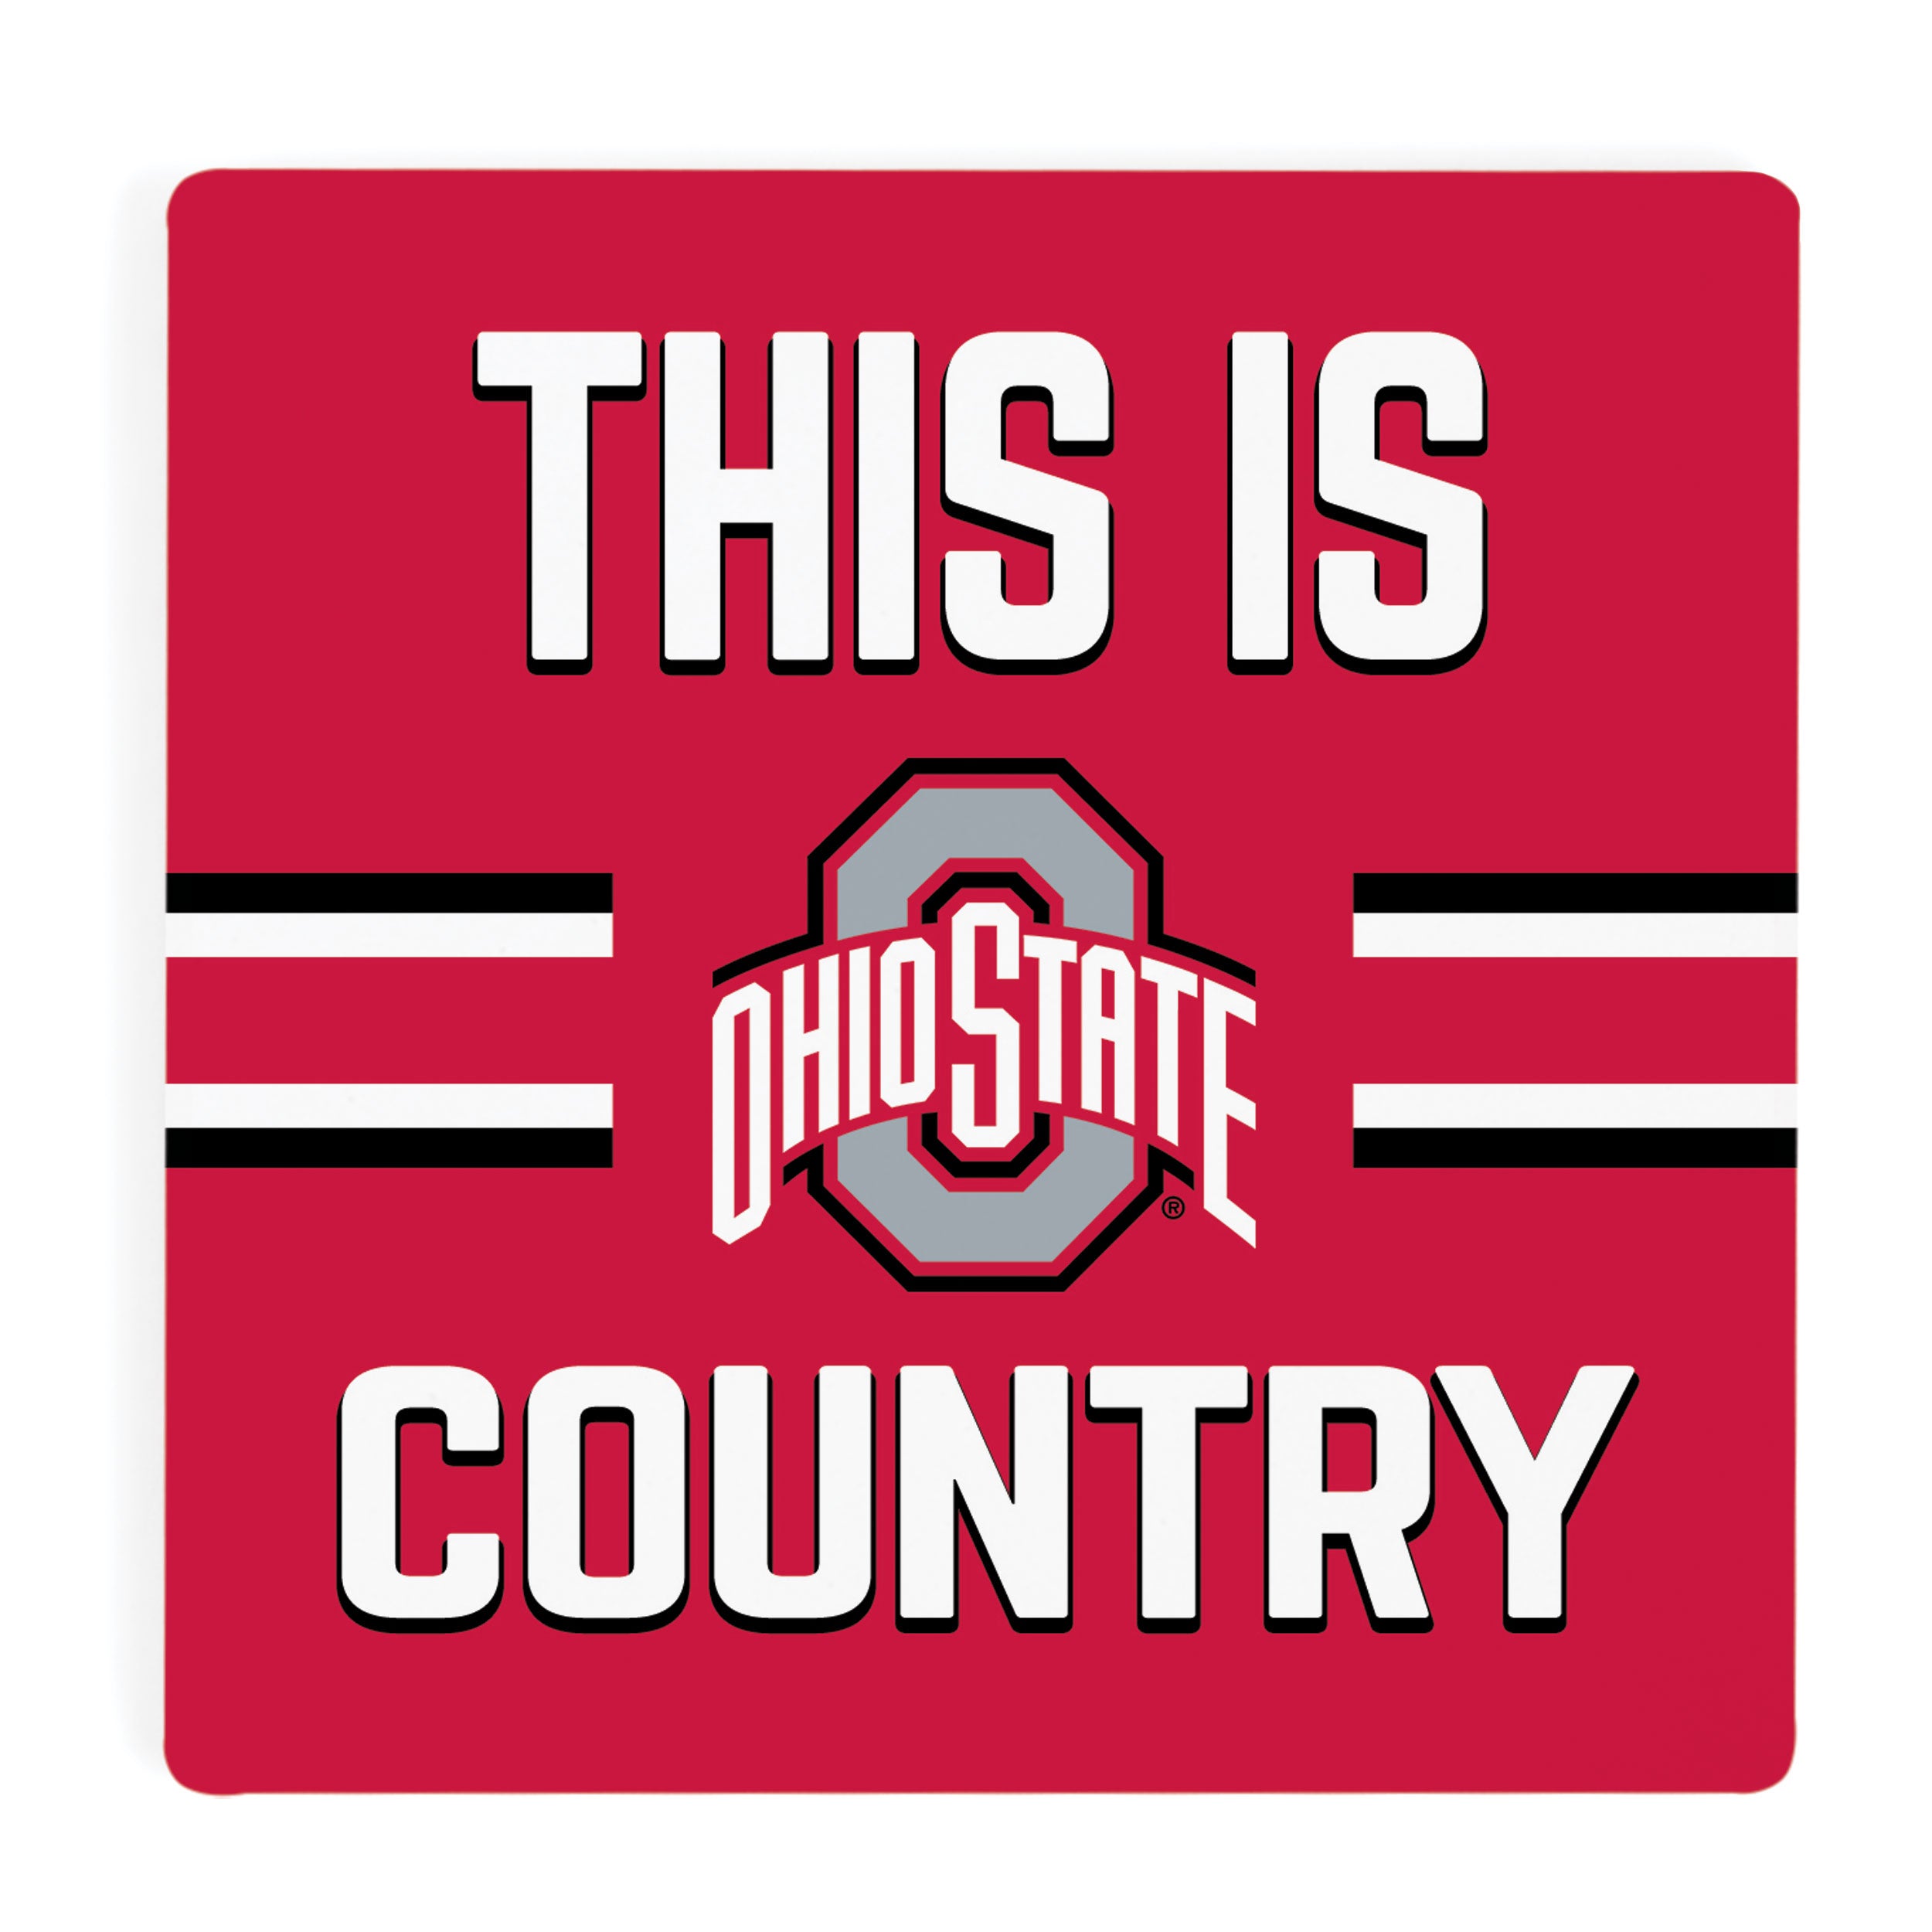 This is (OSU) Country - The Ohio State University Ceramic Coaster